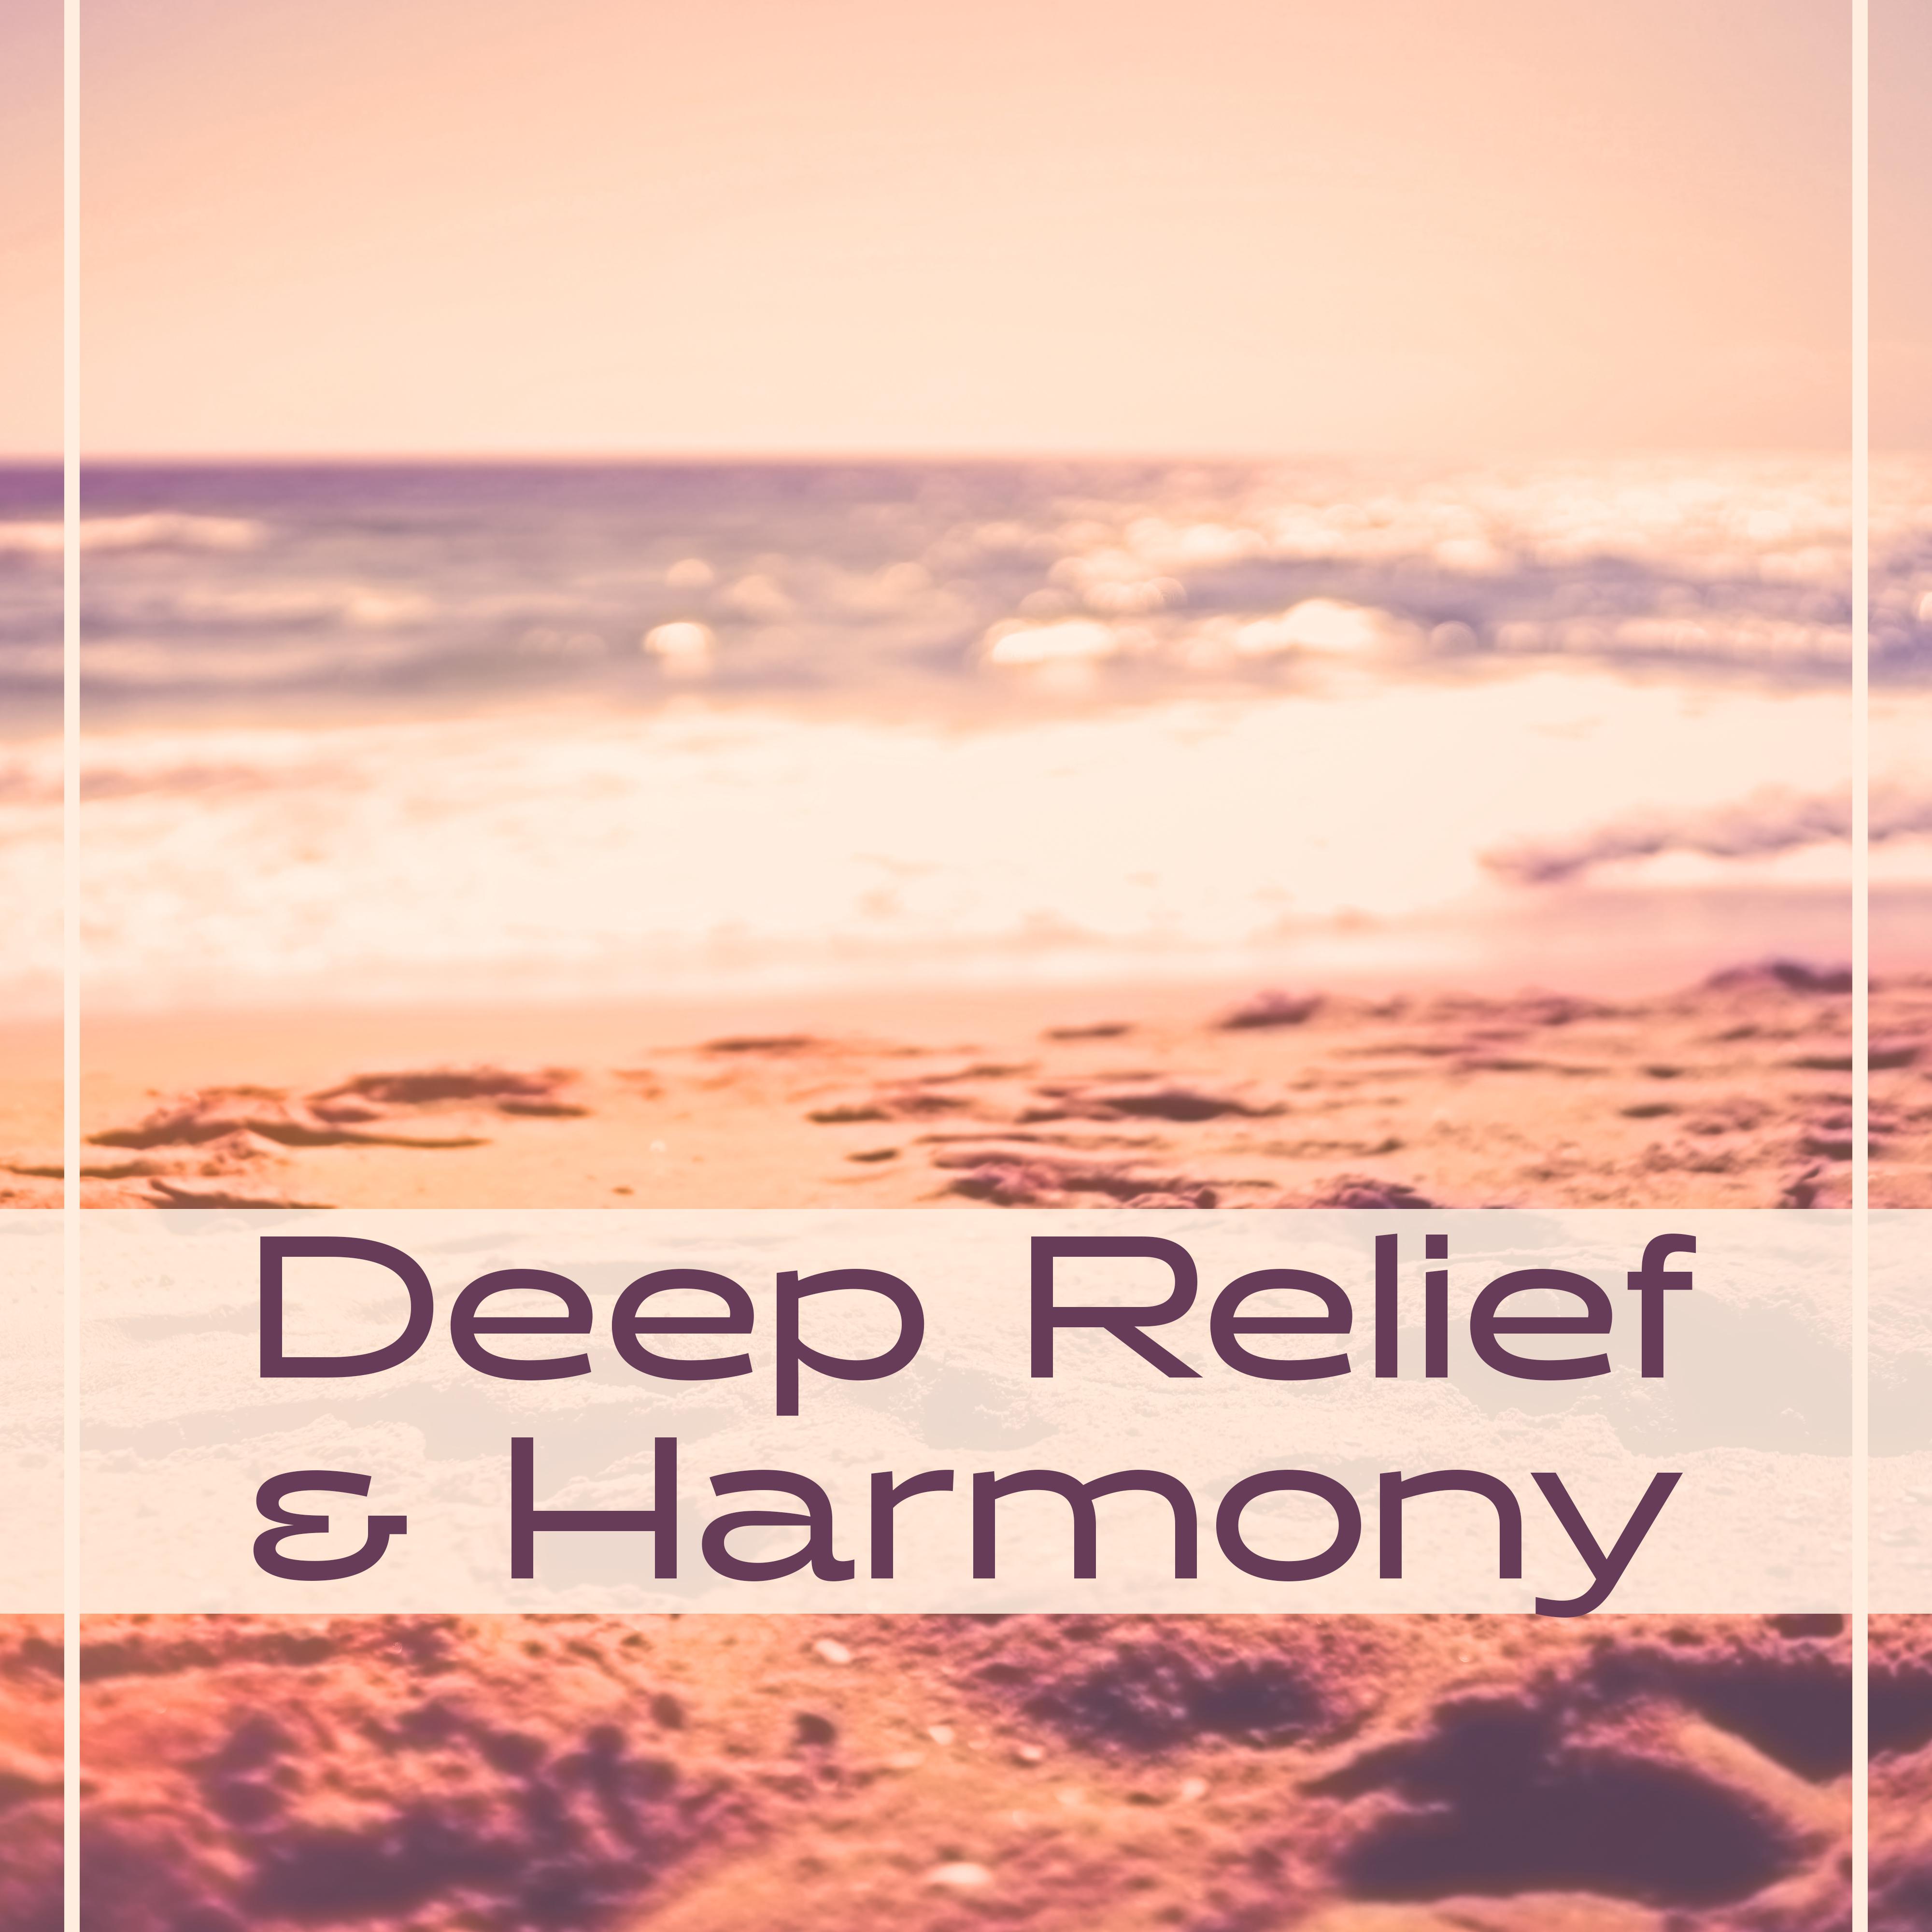 Deep Relief  Harmony  Soothing Sounds for Relaxation, Pure Waves, Deep Sleep, Beach Time, Chillout, Stress Relief